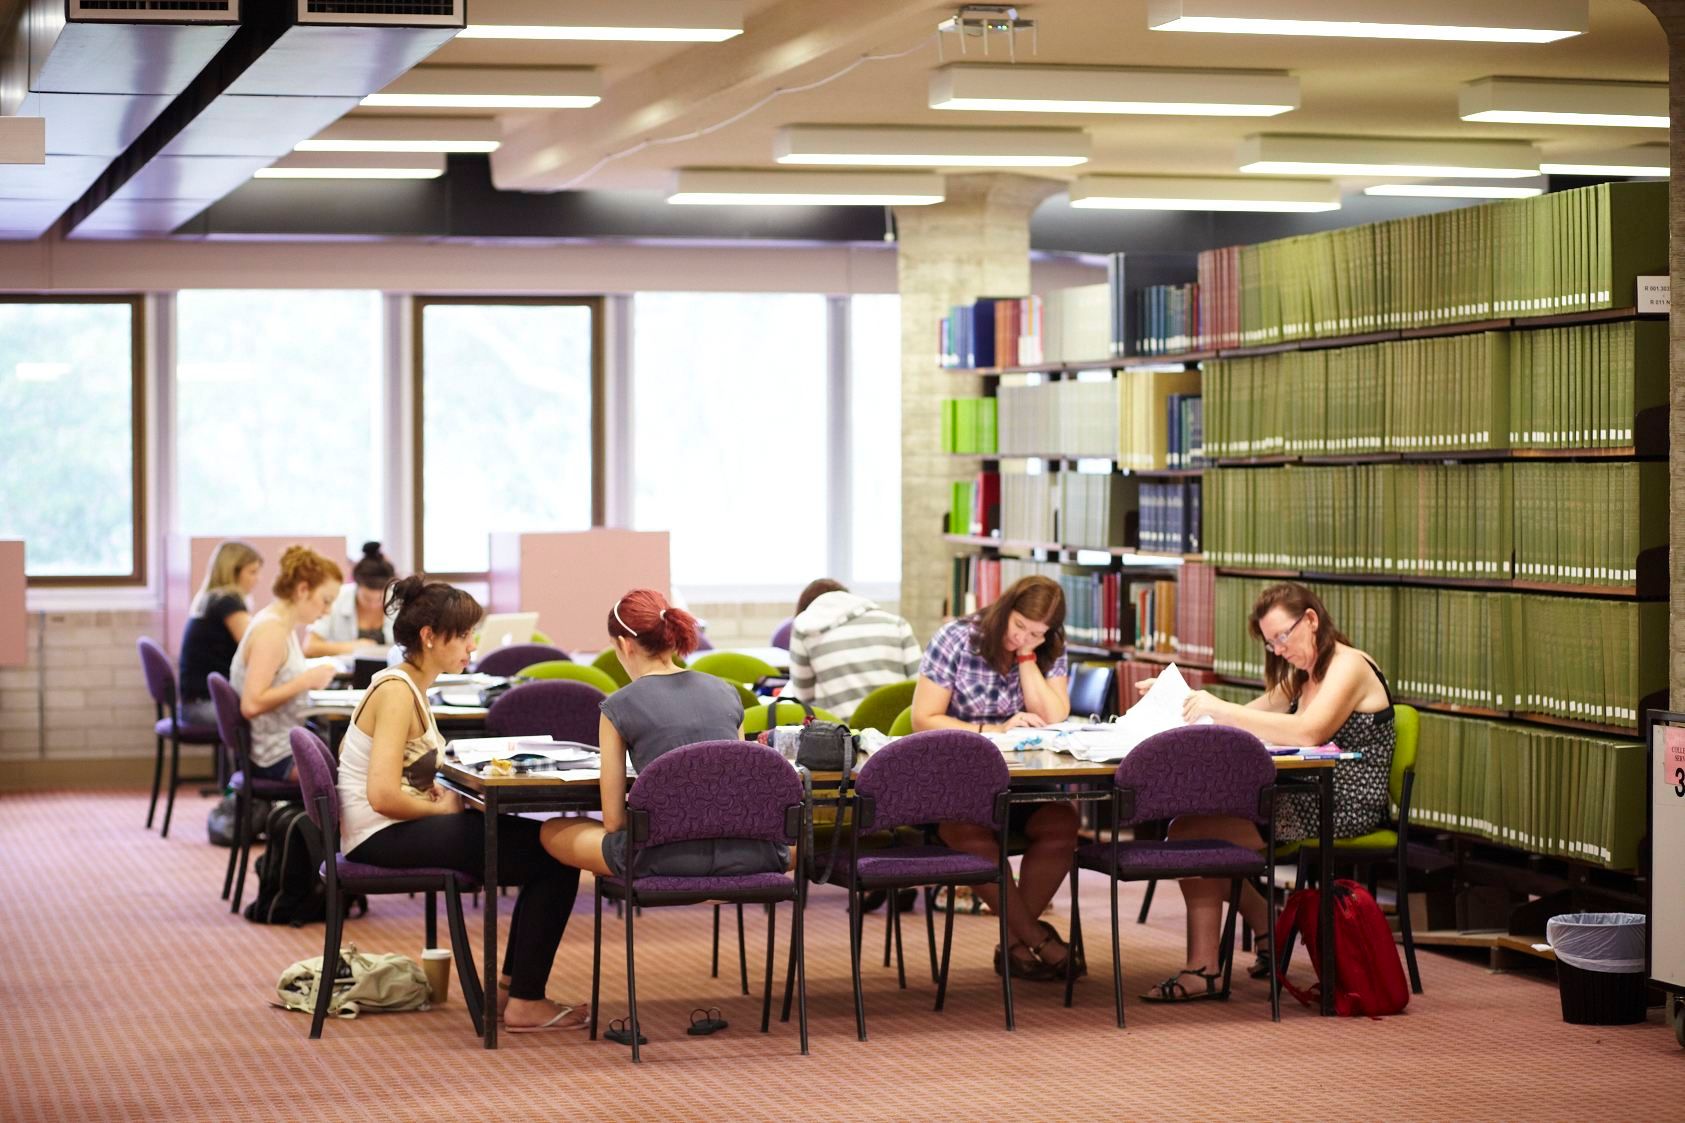 Students sit reading in the library